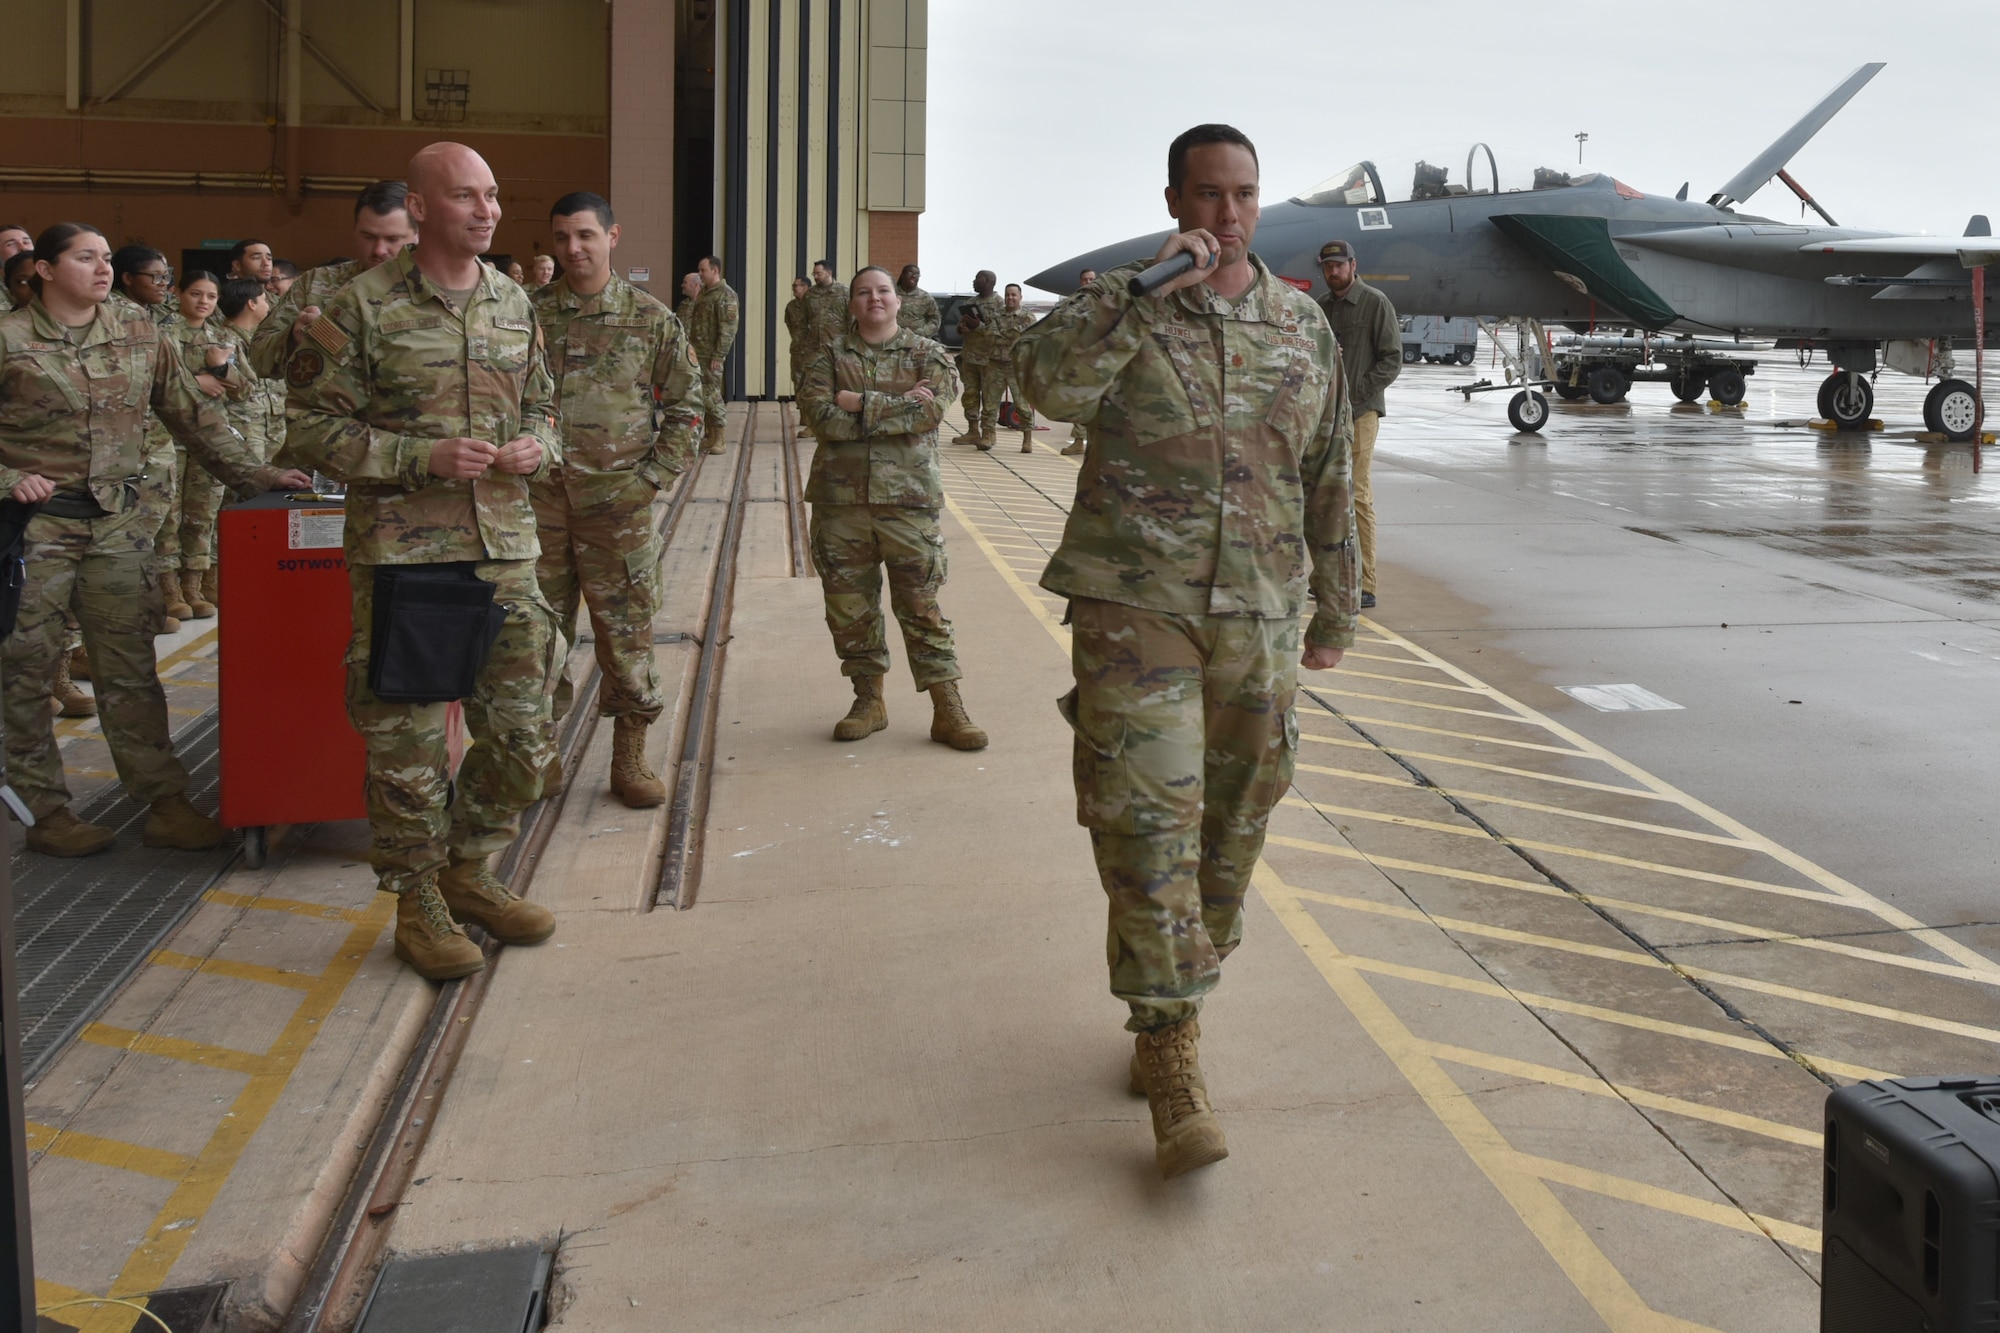 An Air Force officer walks with a microphone as Airmen look on.